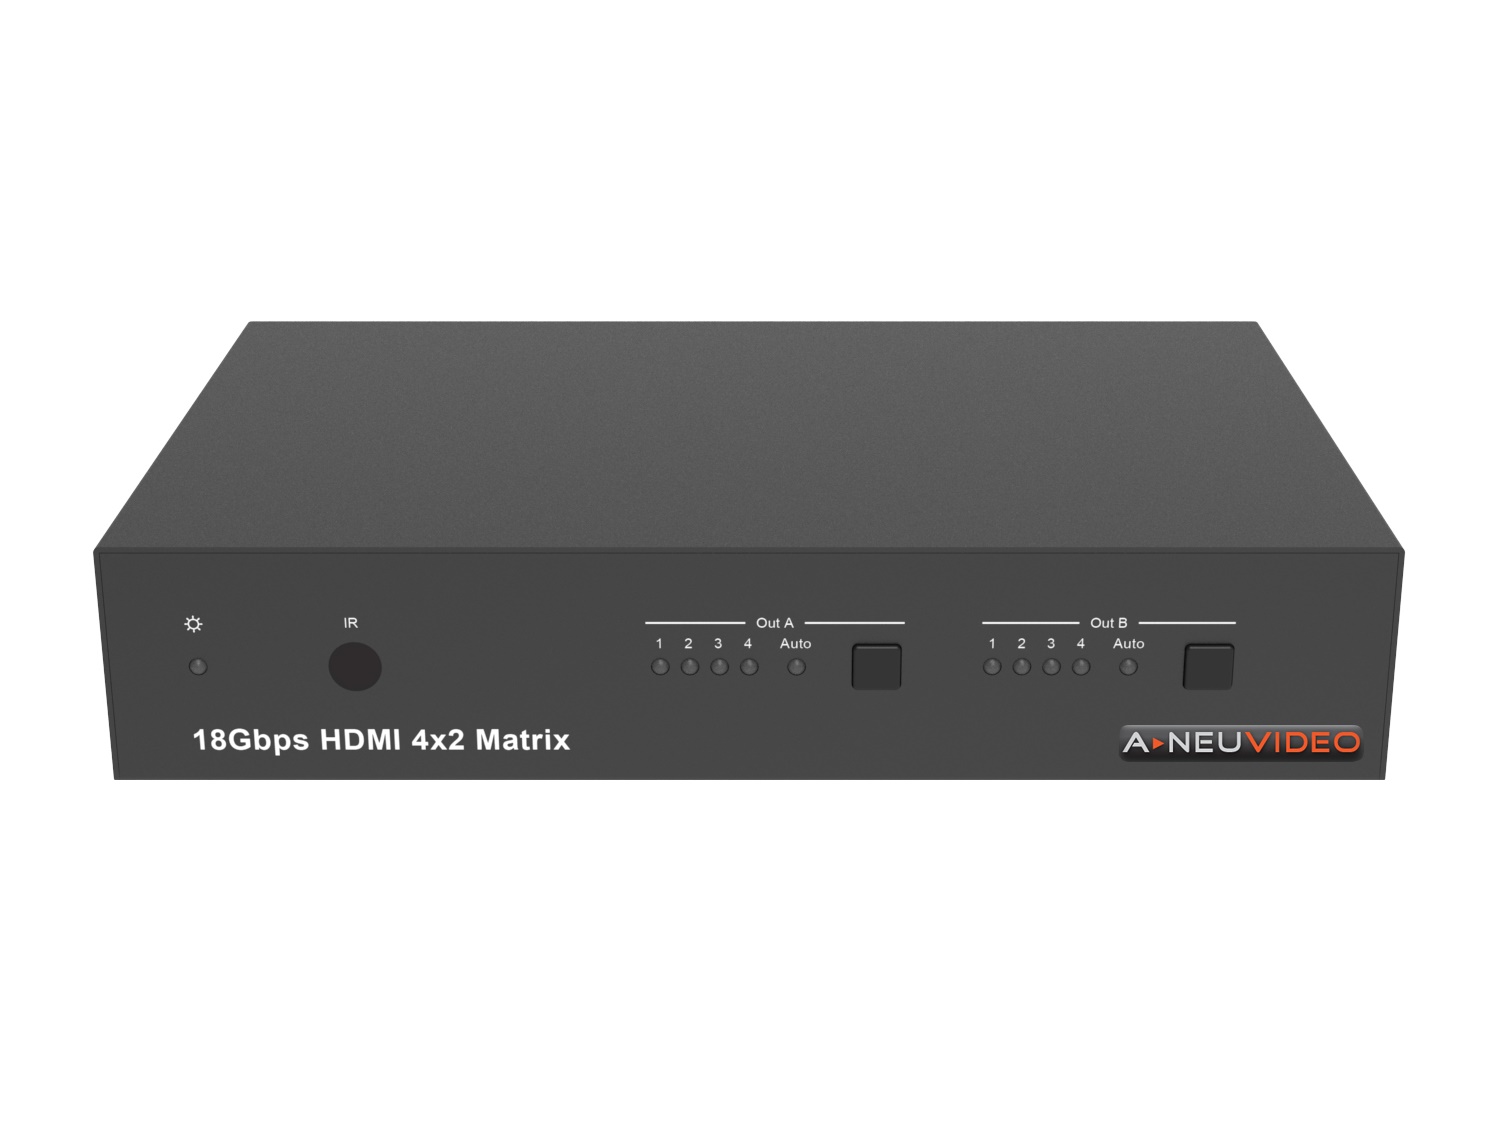 A-NeuVideo ANI-42HDFIX 4x2 HDMI2.0 18Gbps Matrix Switcher with Scaler/SPDIF/Analog and Web-GUI